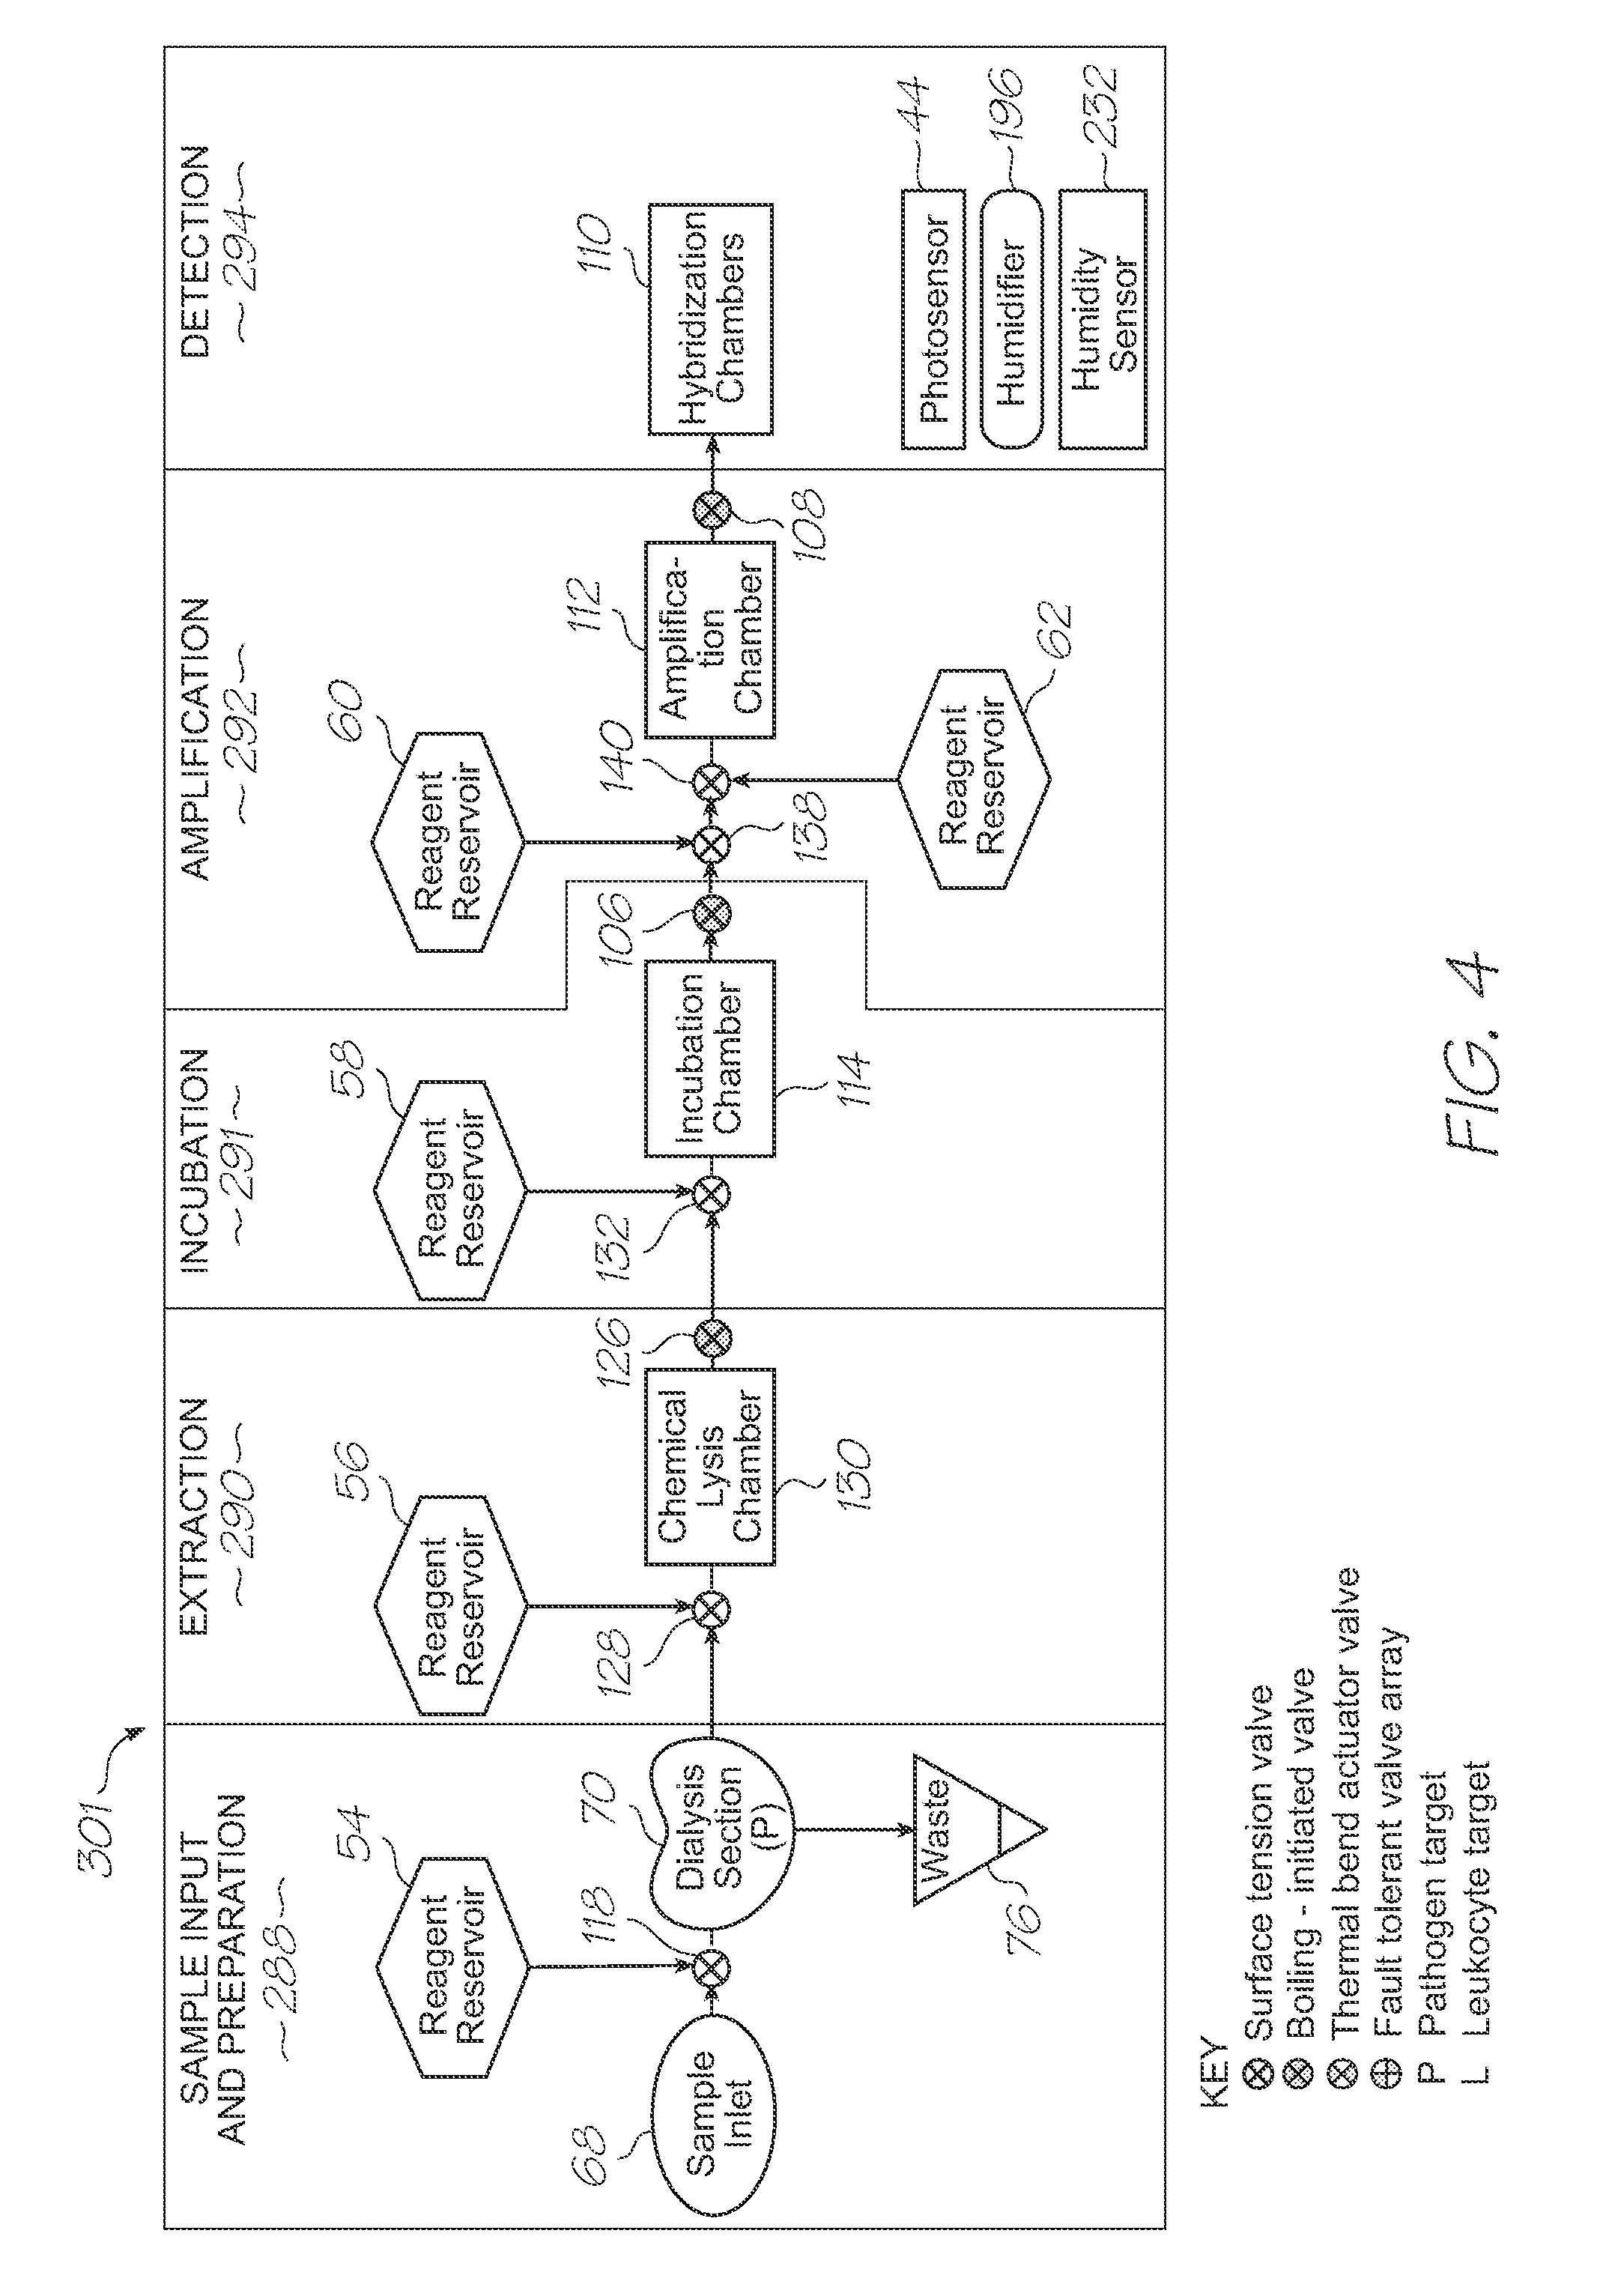 Microfluidic device with dialysis section having stomata tapering counter to flow direction